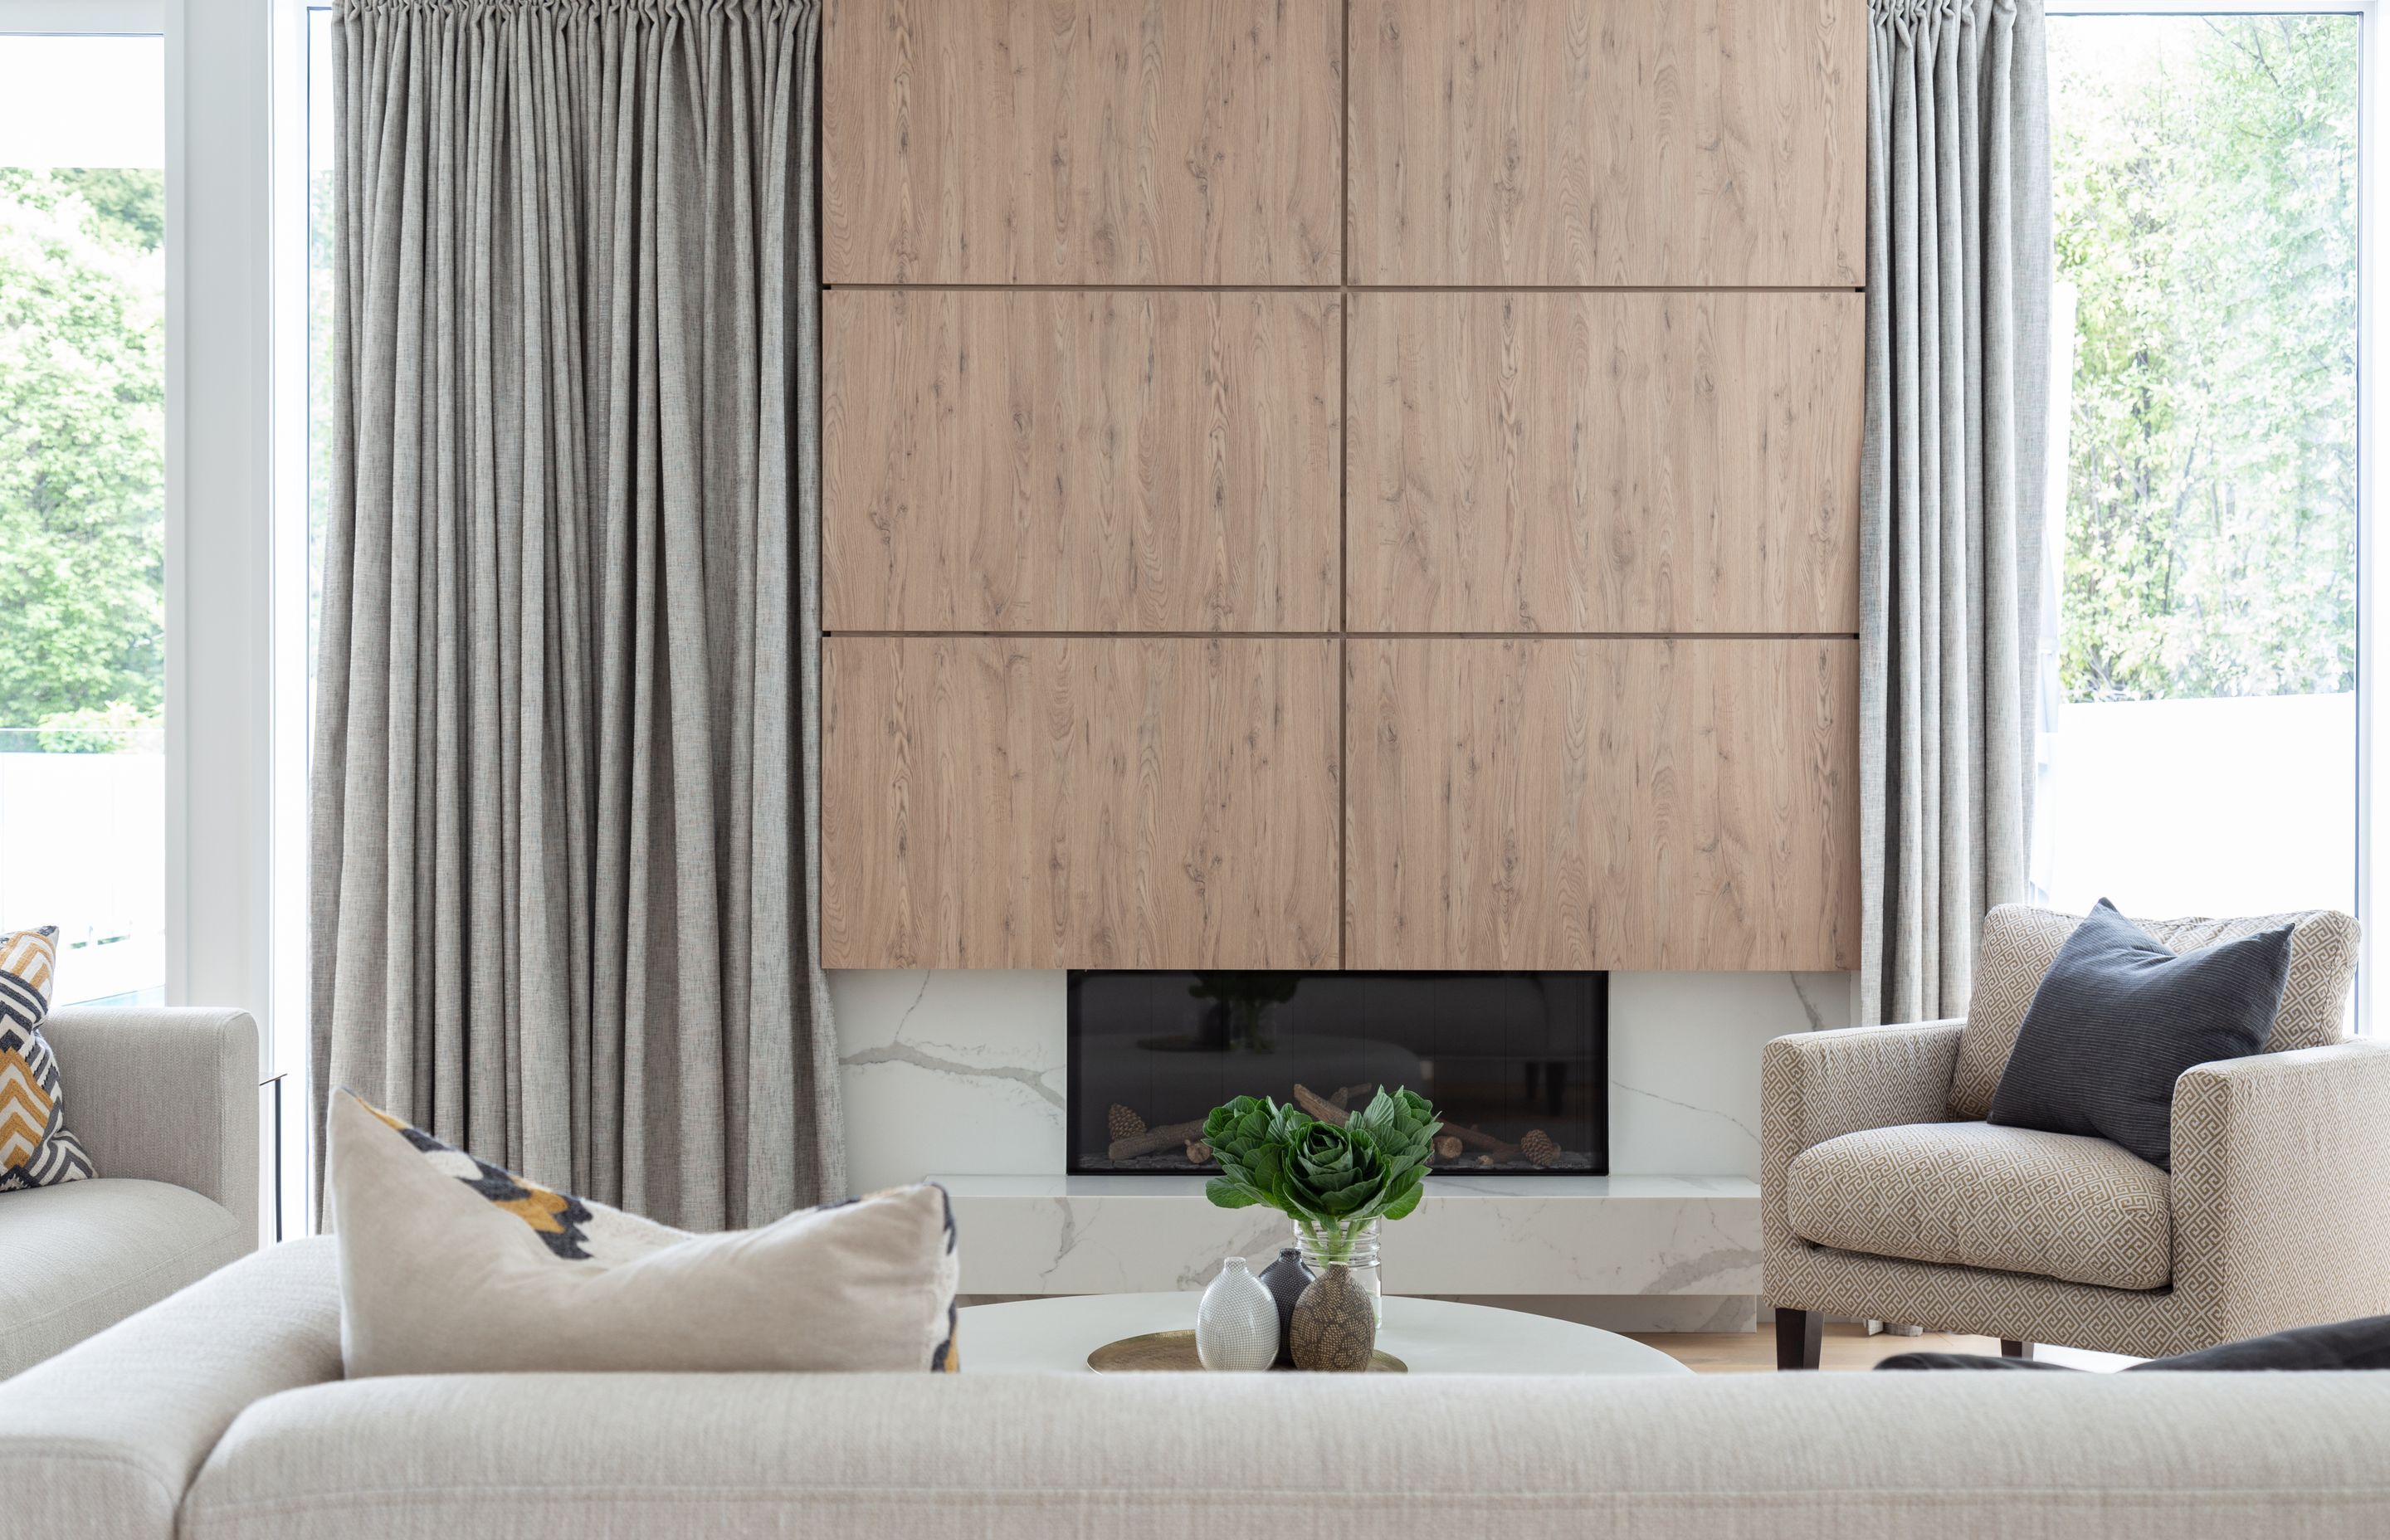 The warm timber paneling of the fireplace juxtaposes against the elegant marble hearth.